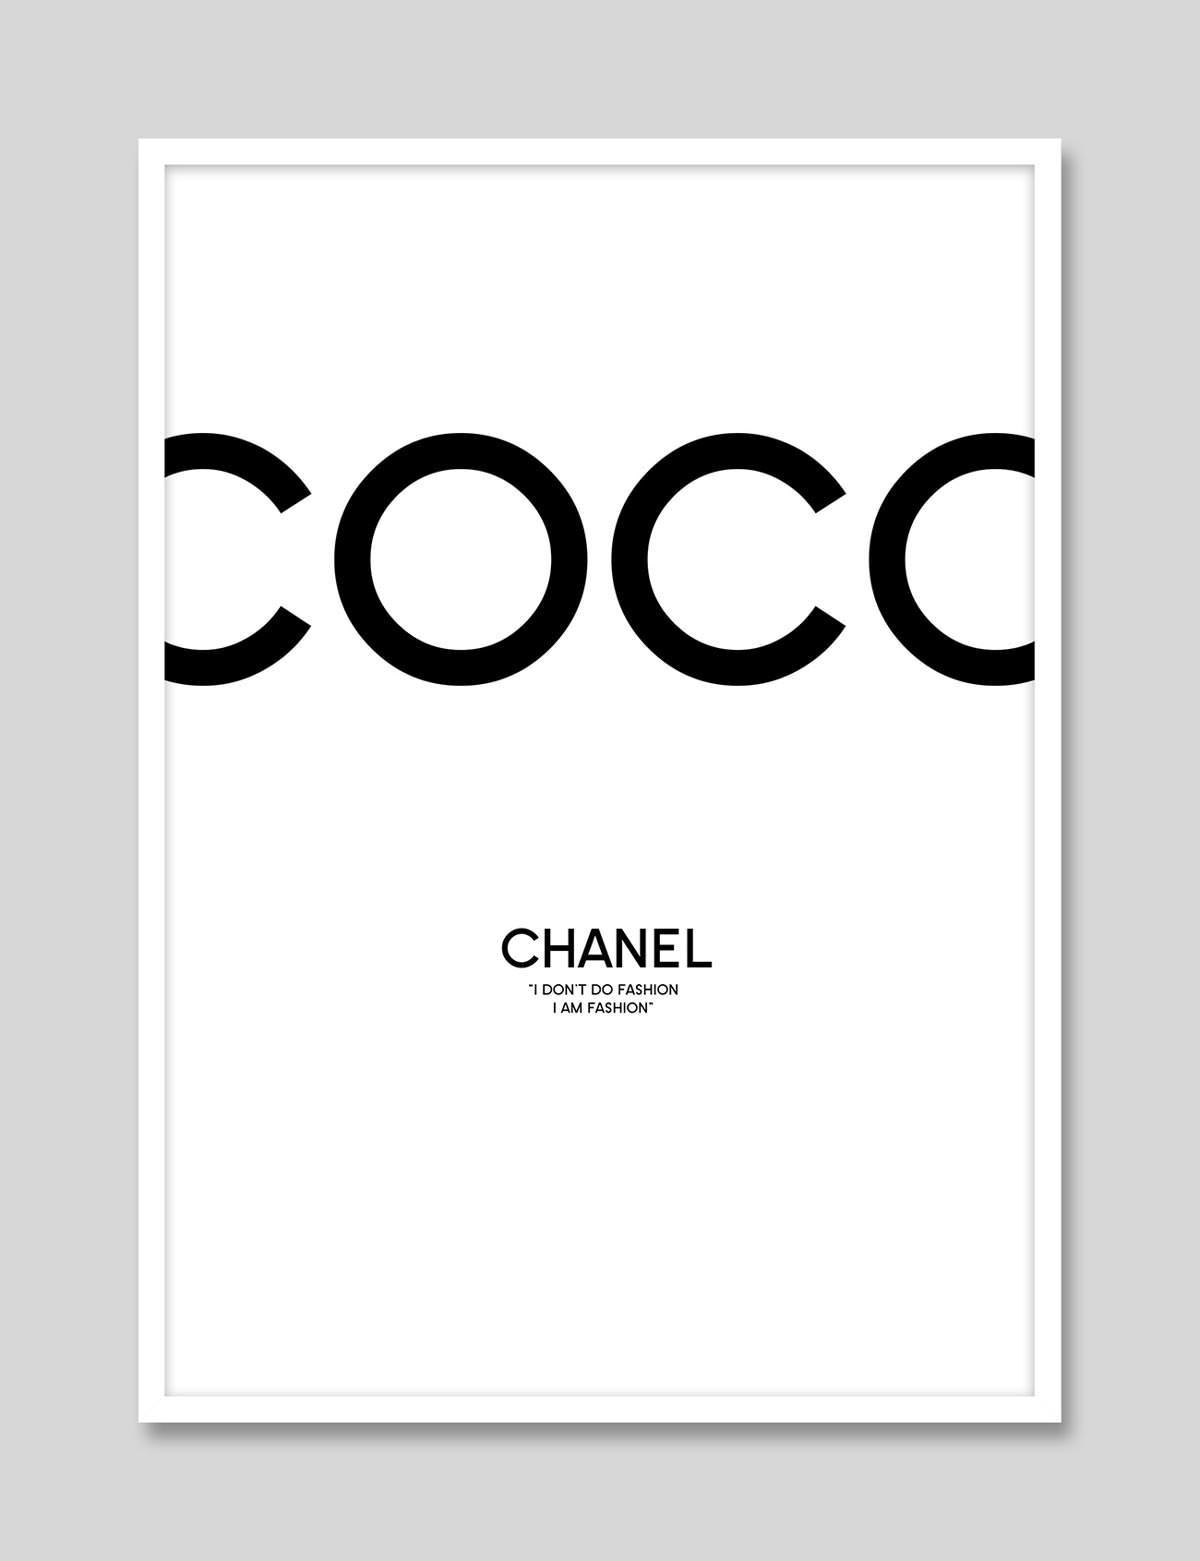 Coco Chanel  Canvas Wall Art Print  Final Touch Decor